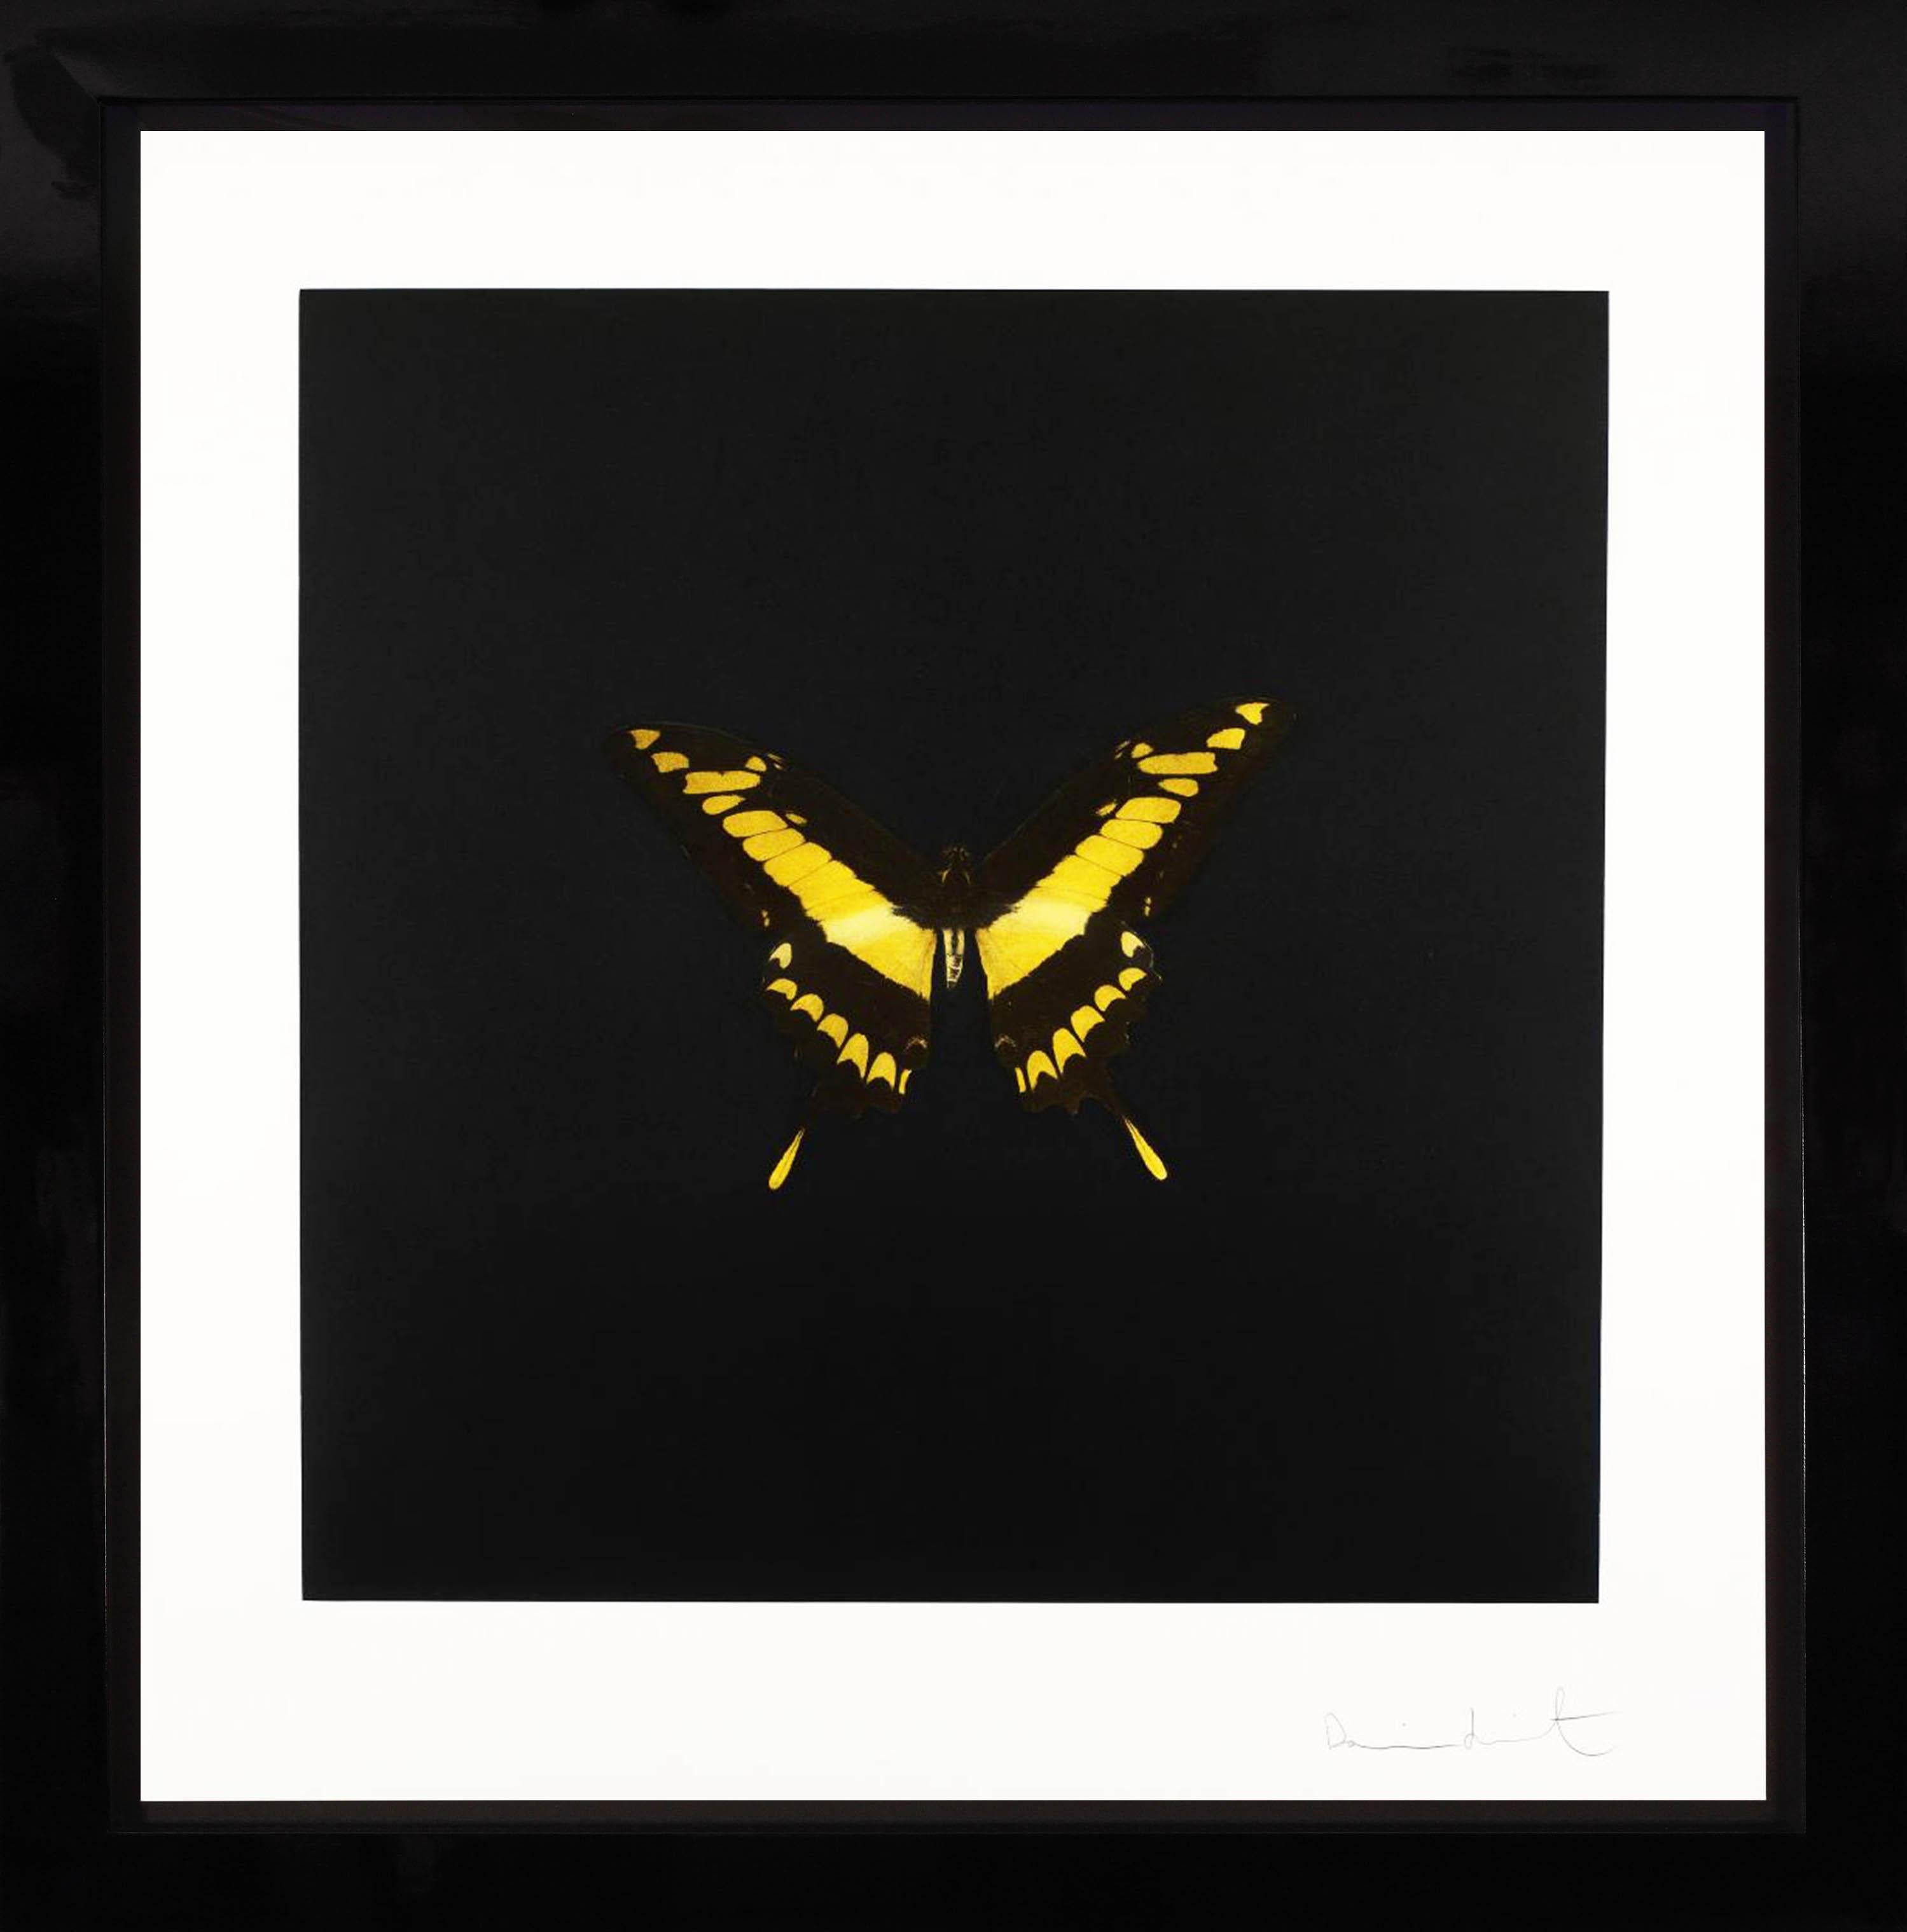 The Yellow Butterfly Soul by Damien Hirst is a photogravure etching in colors on Velin Arches Paper. Created in 2007 as a part of a limited edition of only 72 prints. The pop of bright yellow and black detailing is sophisticated and minimalist.